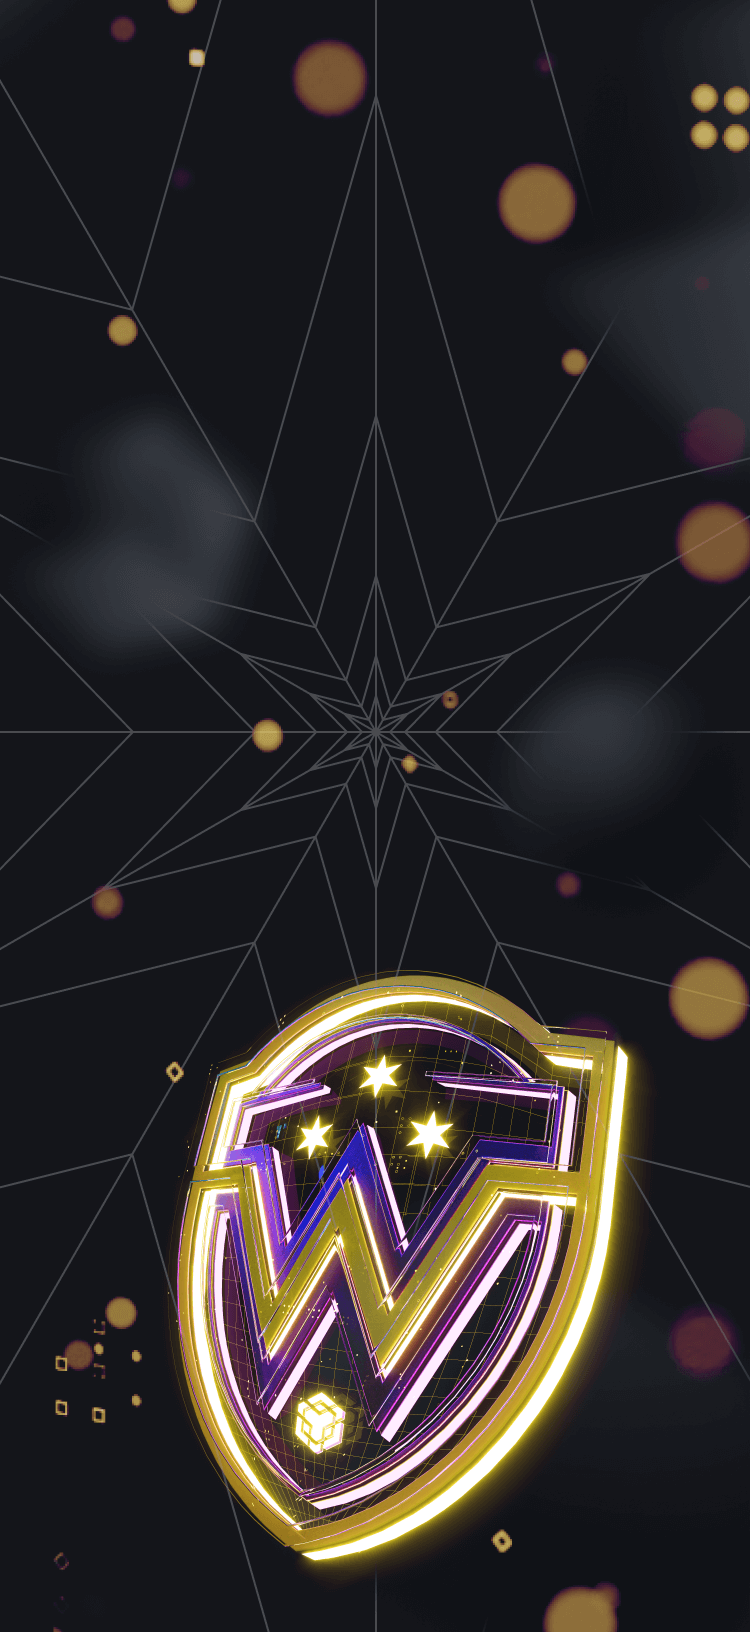 Shield illustration with a W and BNB Chain logo on a background with stars and shapes.